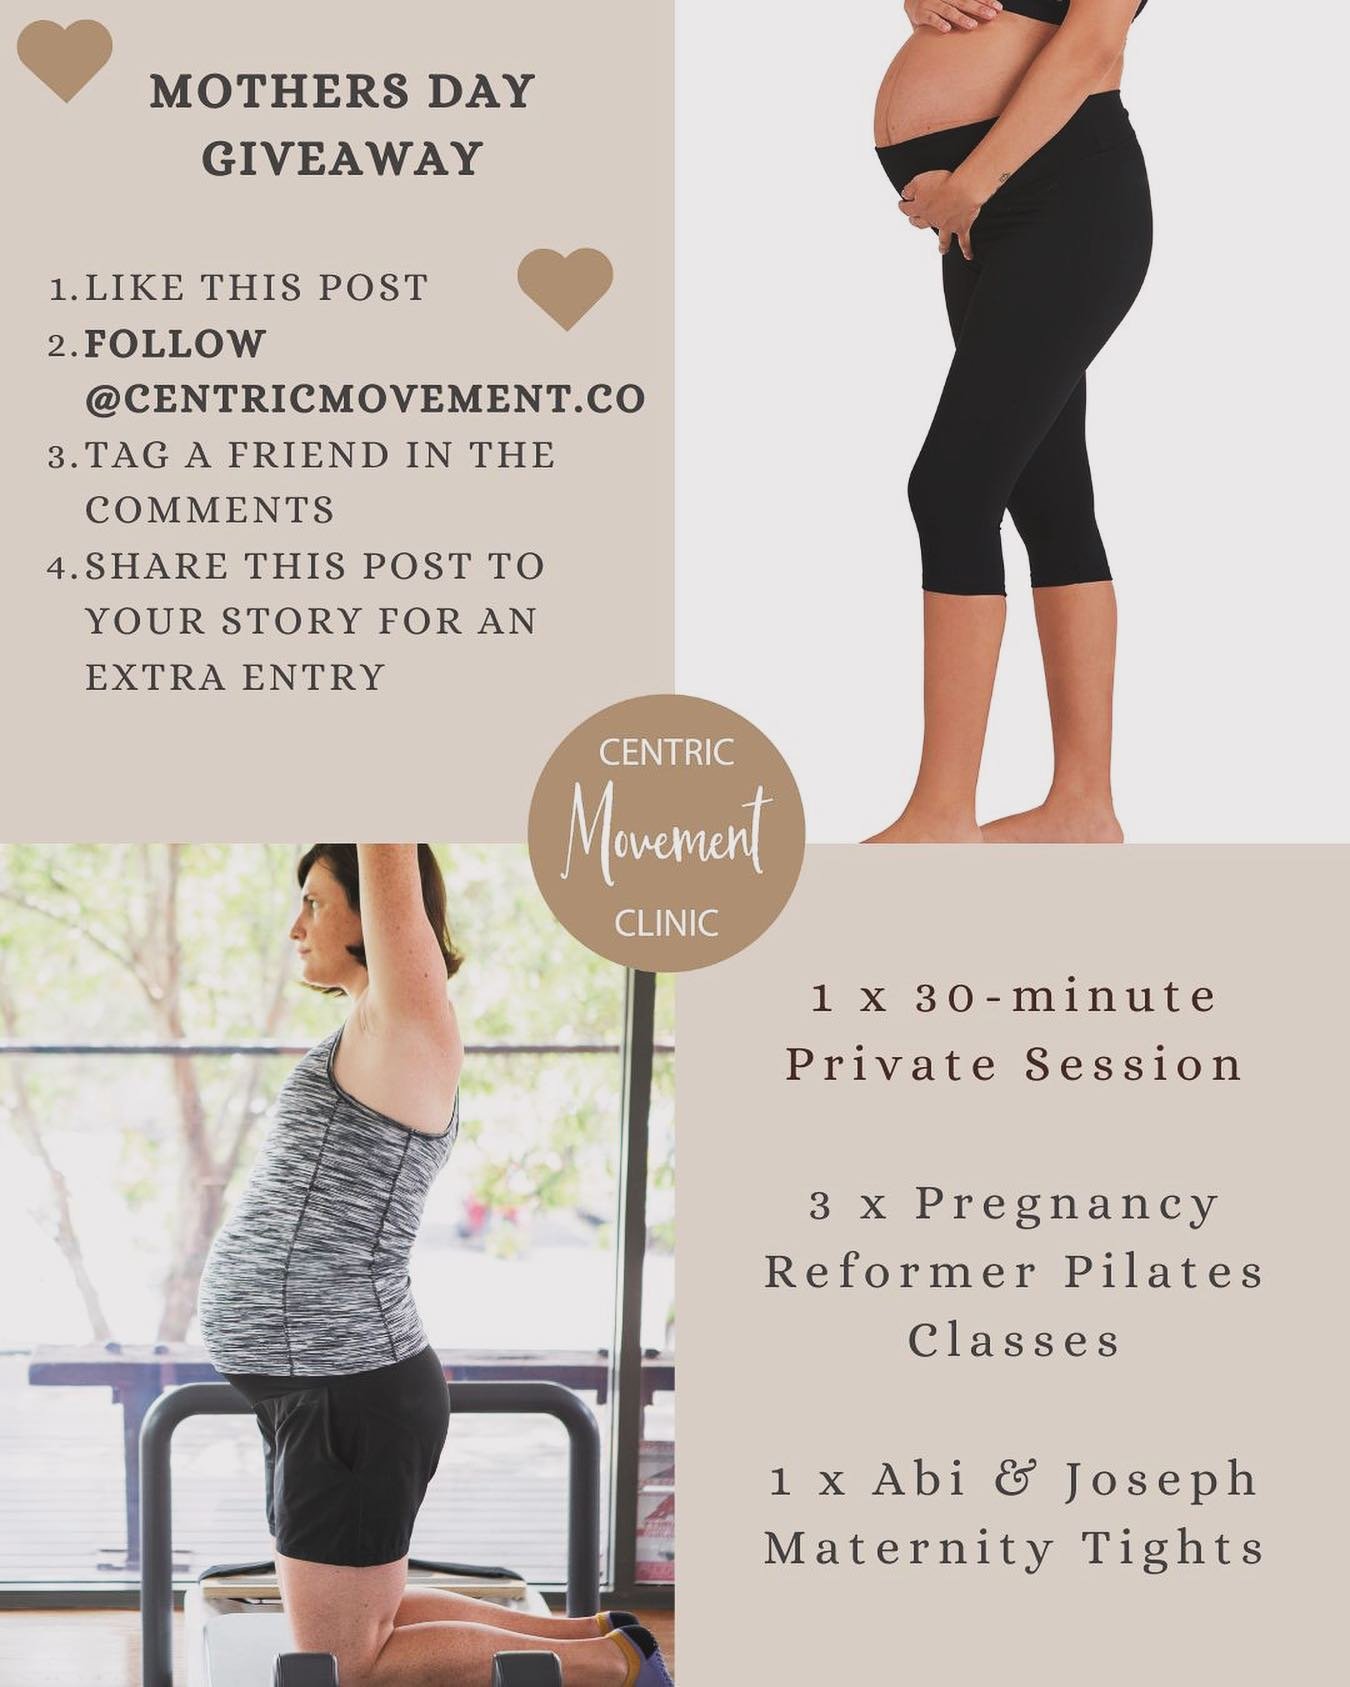 GIVEAWAY TIME 🤩🤰

Mother&rsquo;s Day giveaway. 

What will the winner receive?
- 1 x Private 1-on-1 session with one of our instructors 
- 3 x Pregnancy Reformer classes 
- 1 x Pair of Abi and Joseph Maternity Tights 

How to enter?
1. Like this po